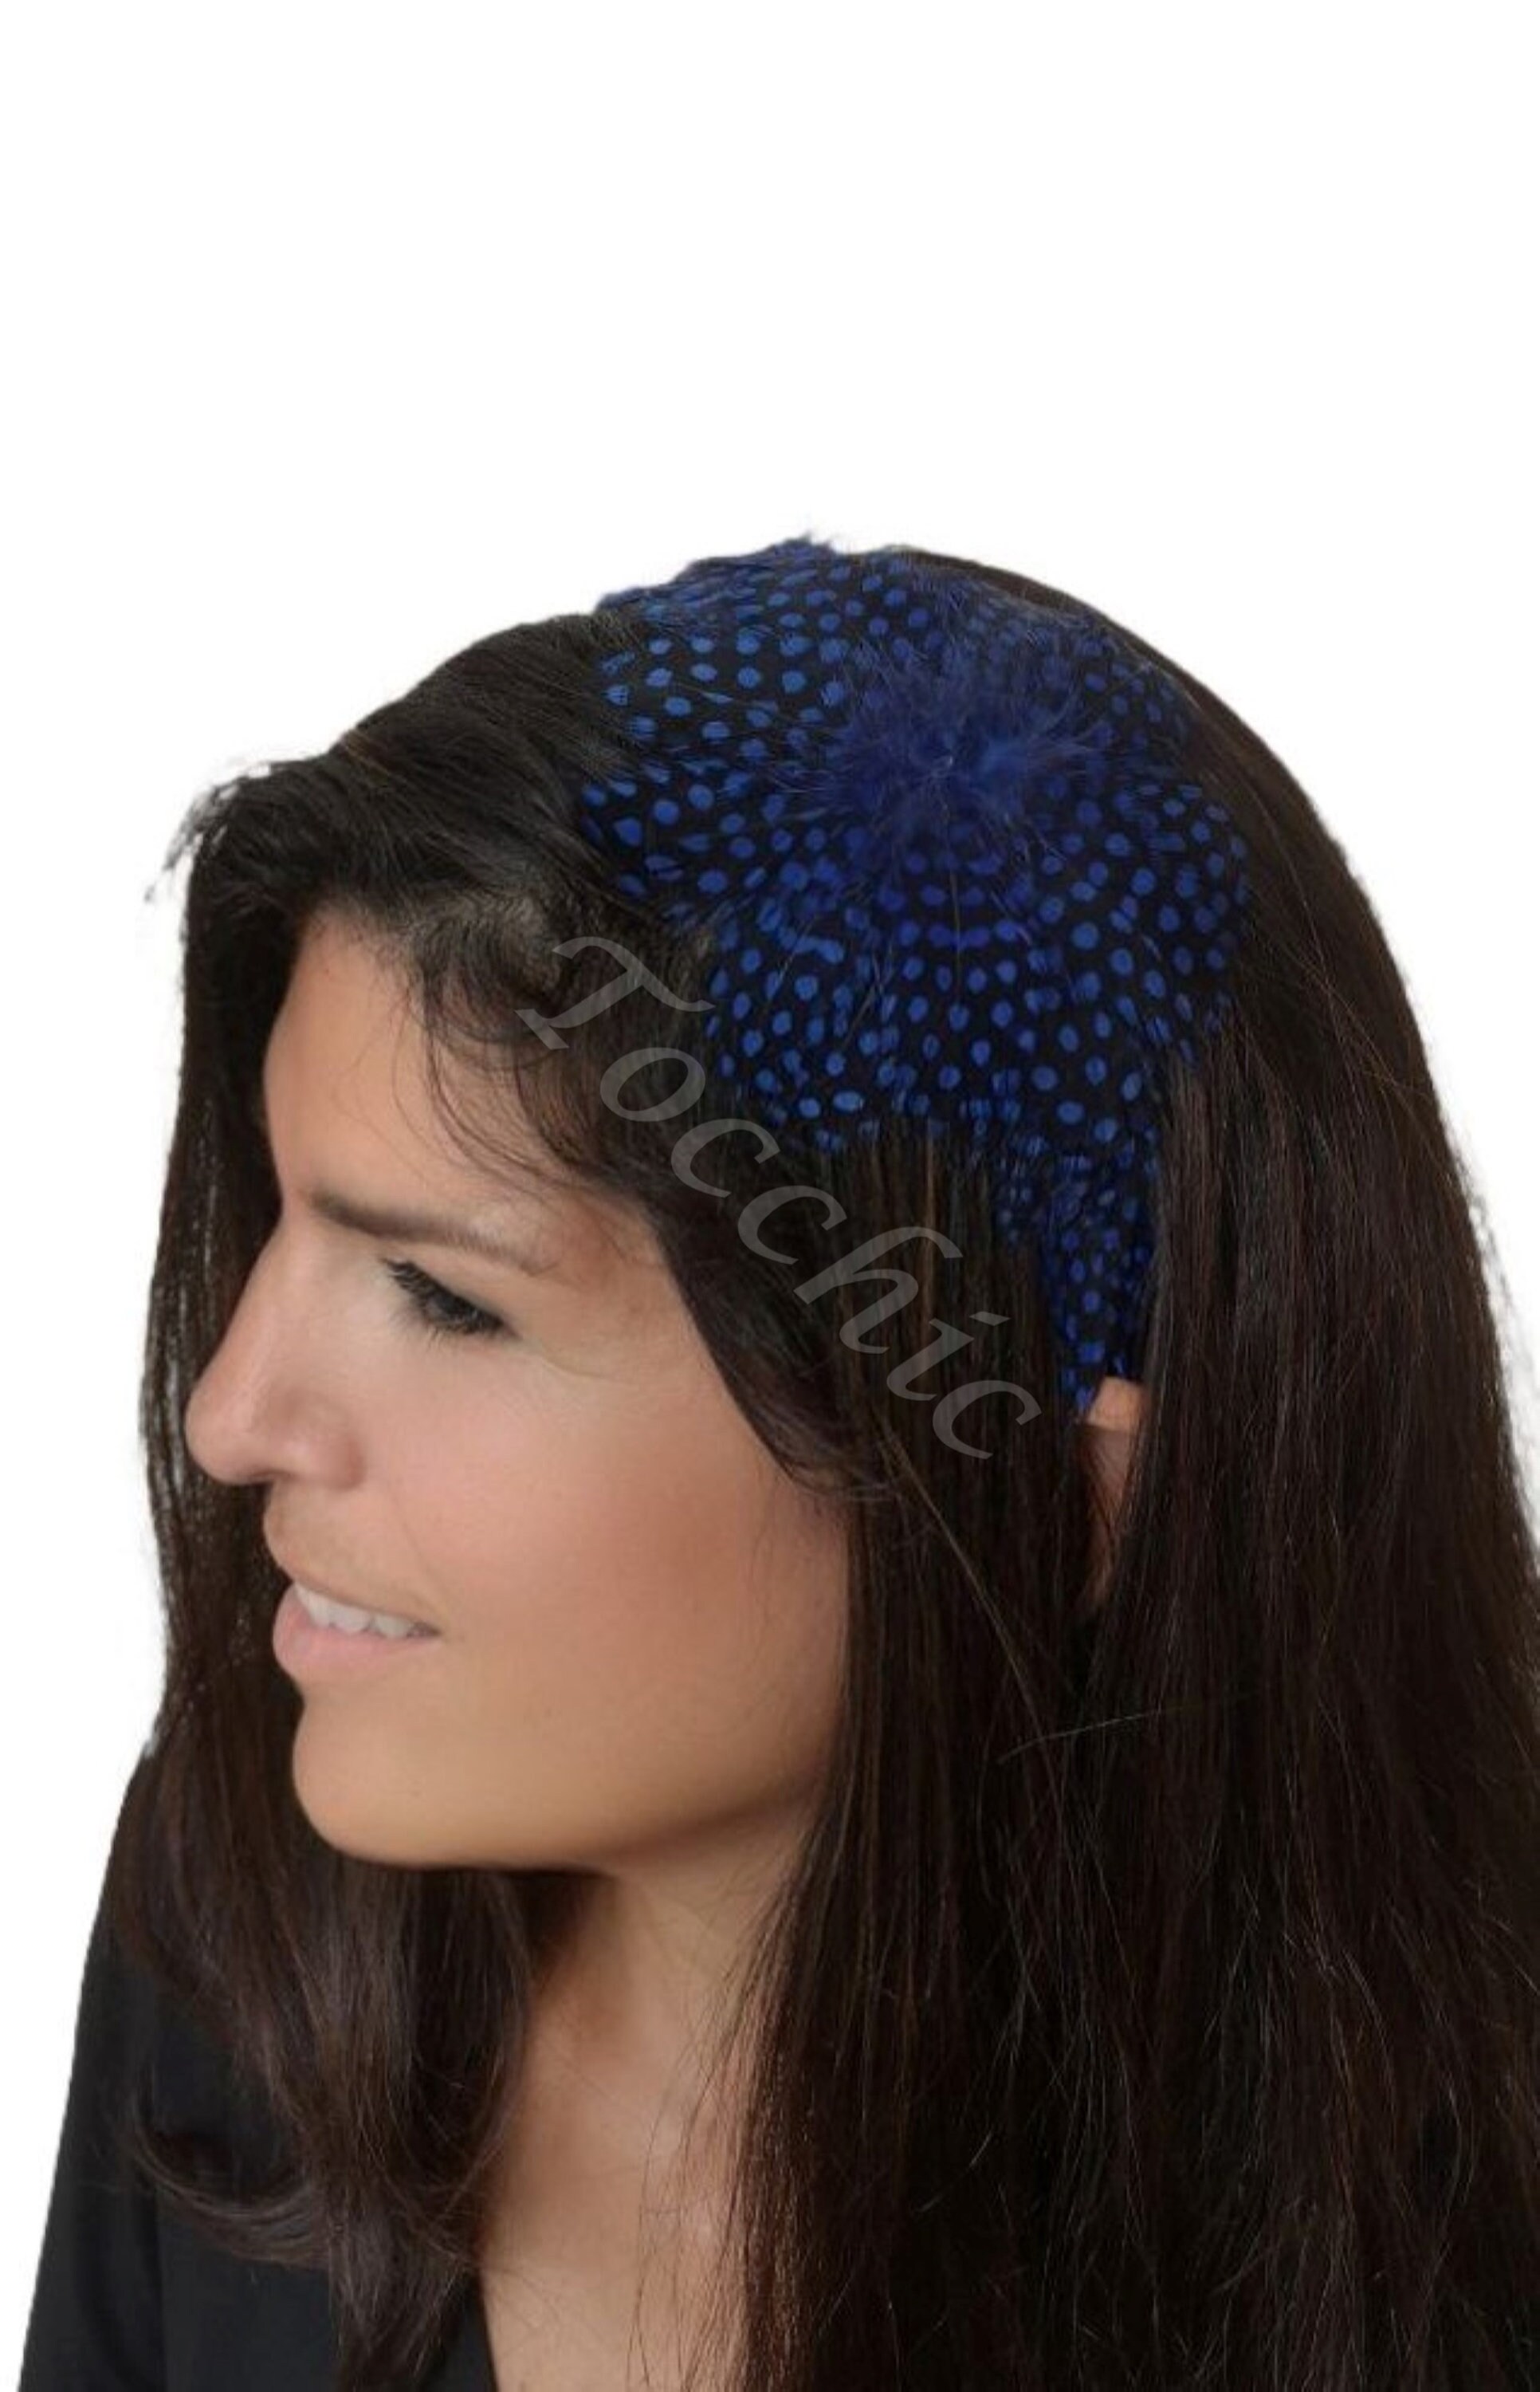 Unique Lady Girl Headpiece Hairdresses Hair Comb Hair Band Accessory Headband 